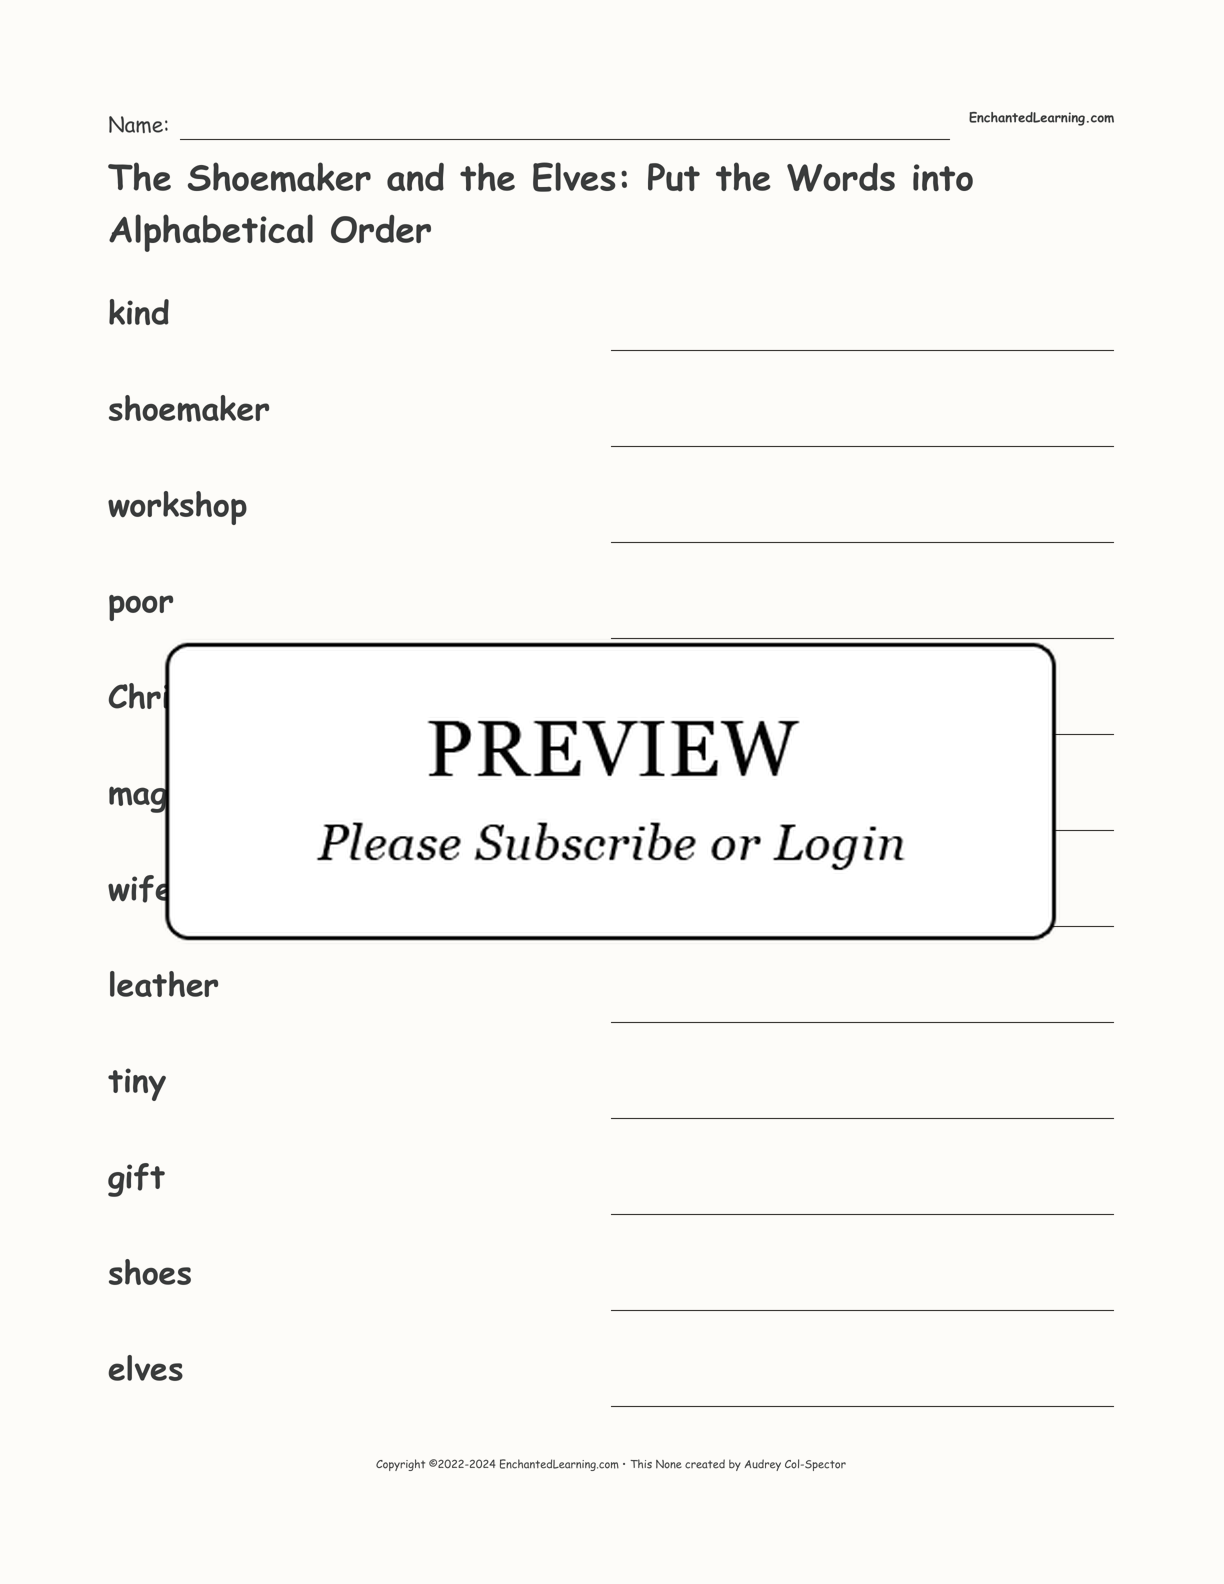 The Shoemaker and the Elves: Put the Words into Alphabetical Order interactive worksheet page 1